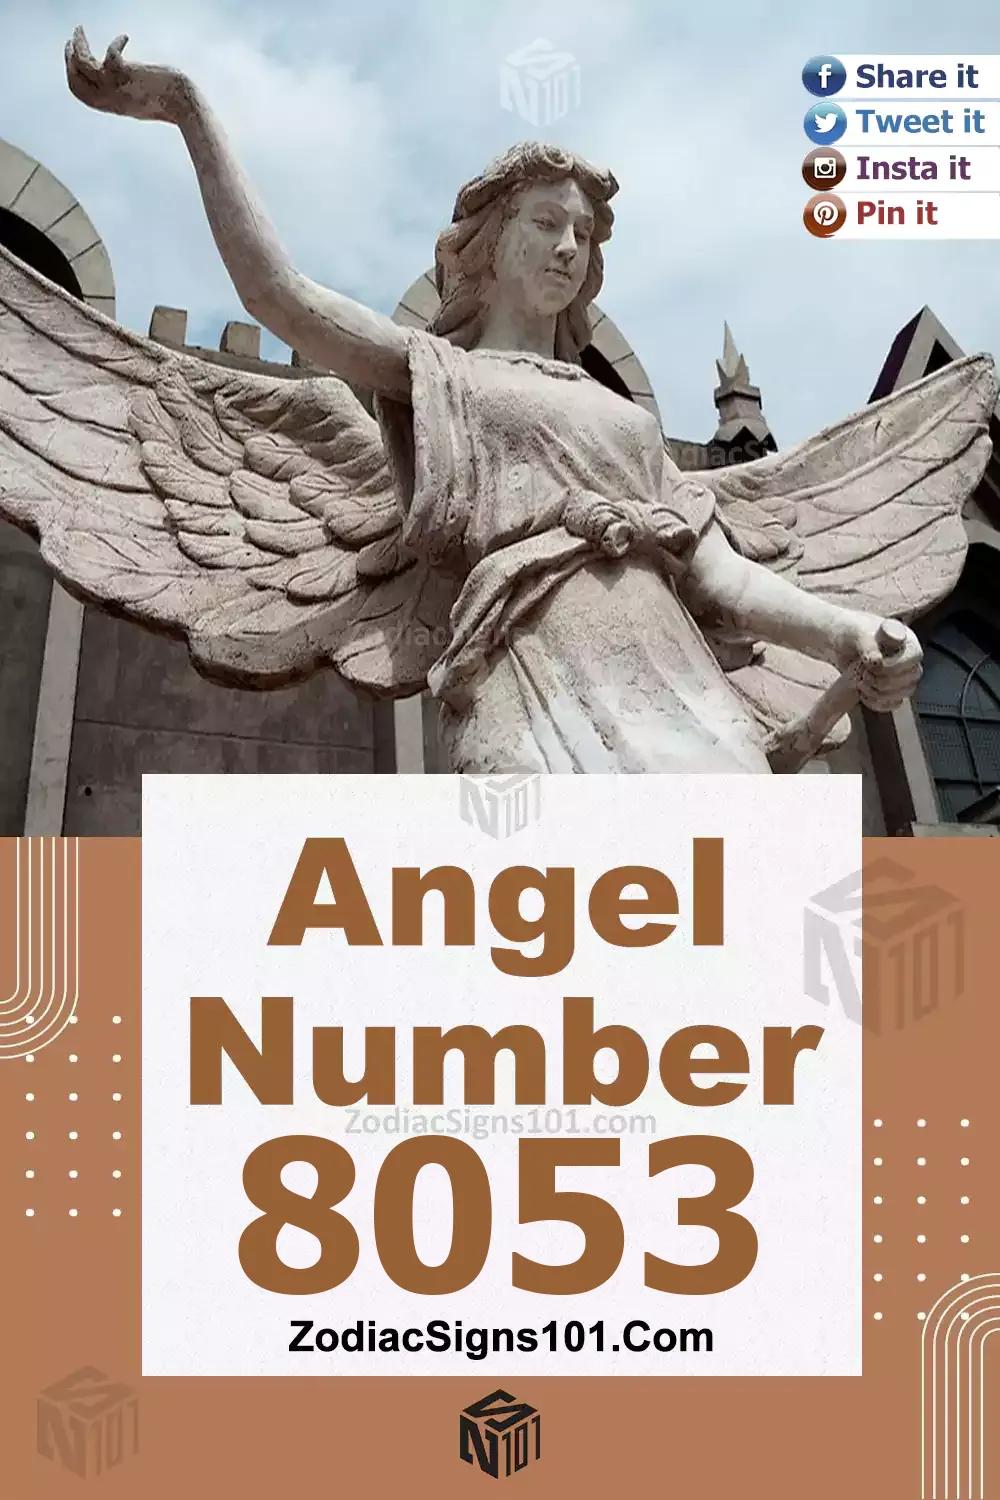 8053 Angel Number Meaning